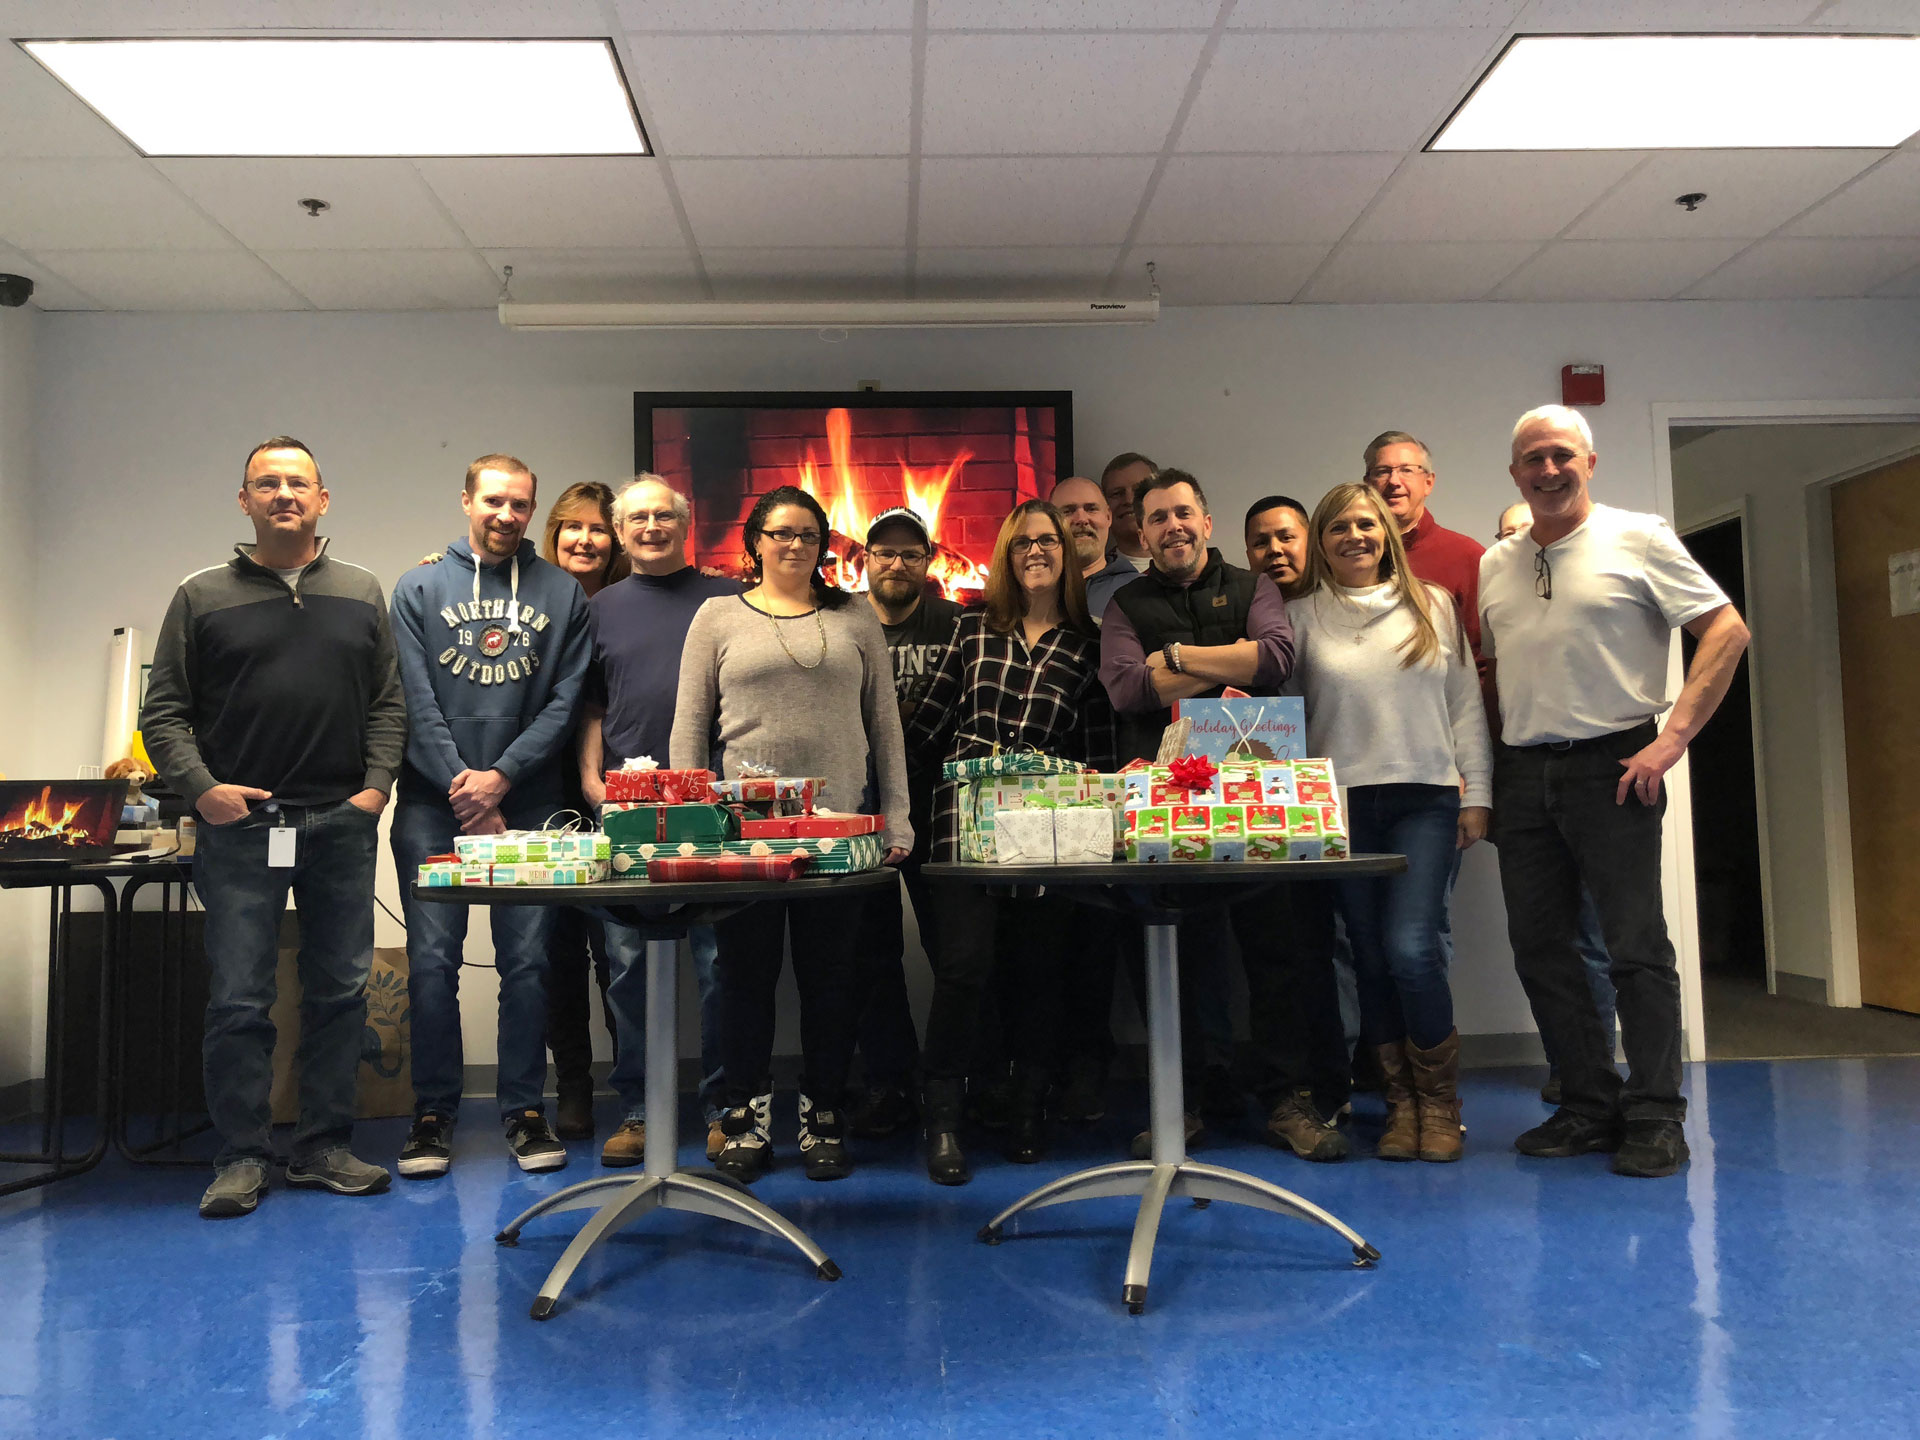 2019: Canvys MA Team supports children in need